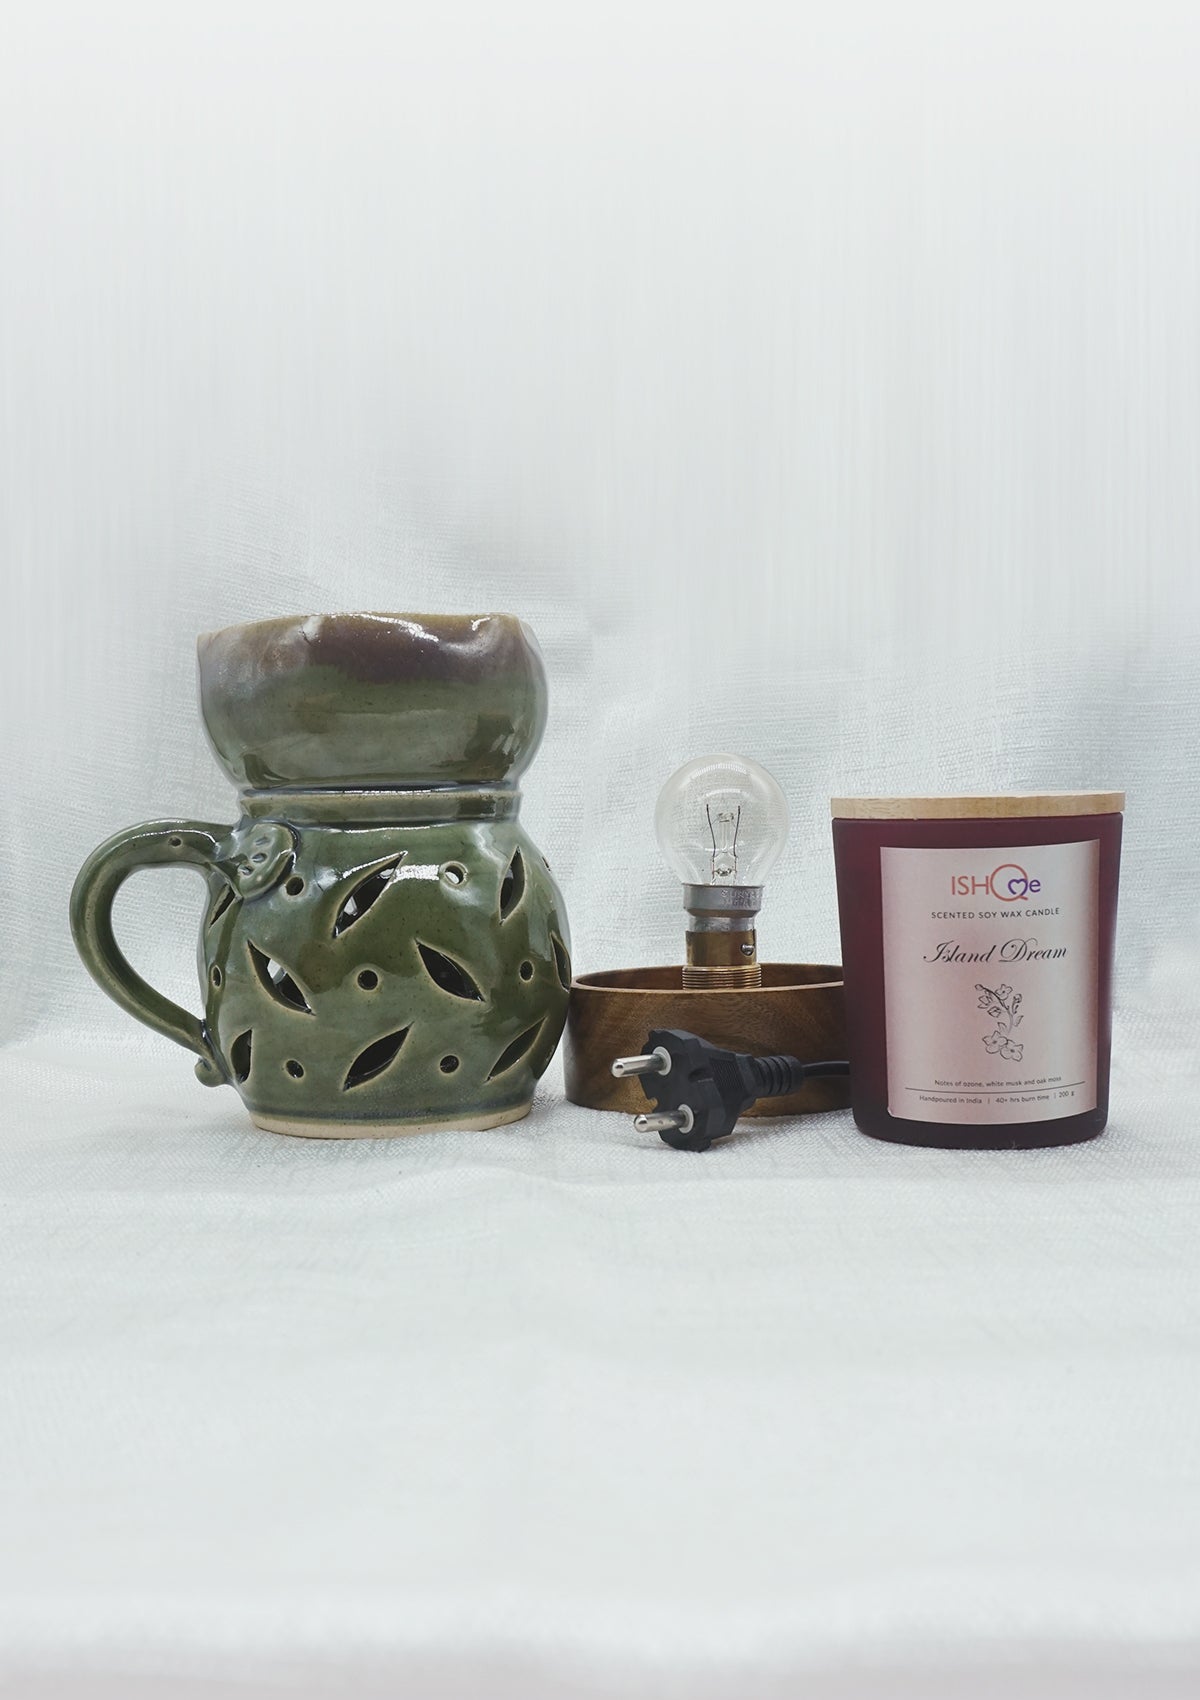 IshqME Scented Dreams Combo: Electric Diffuser & Island Dream Scented Candle - IshqMe